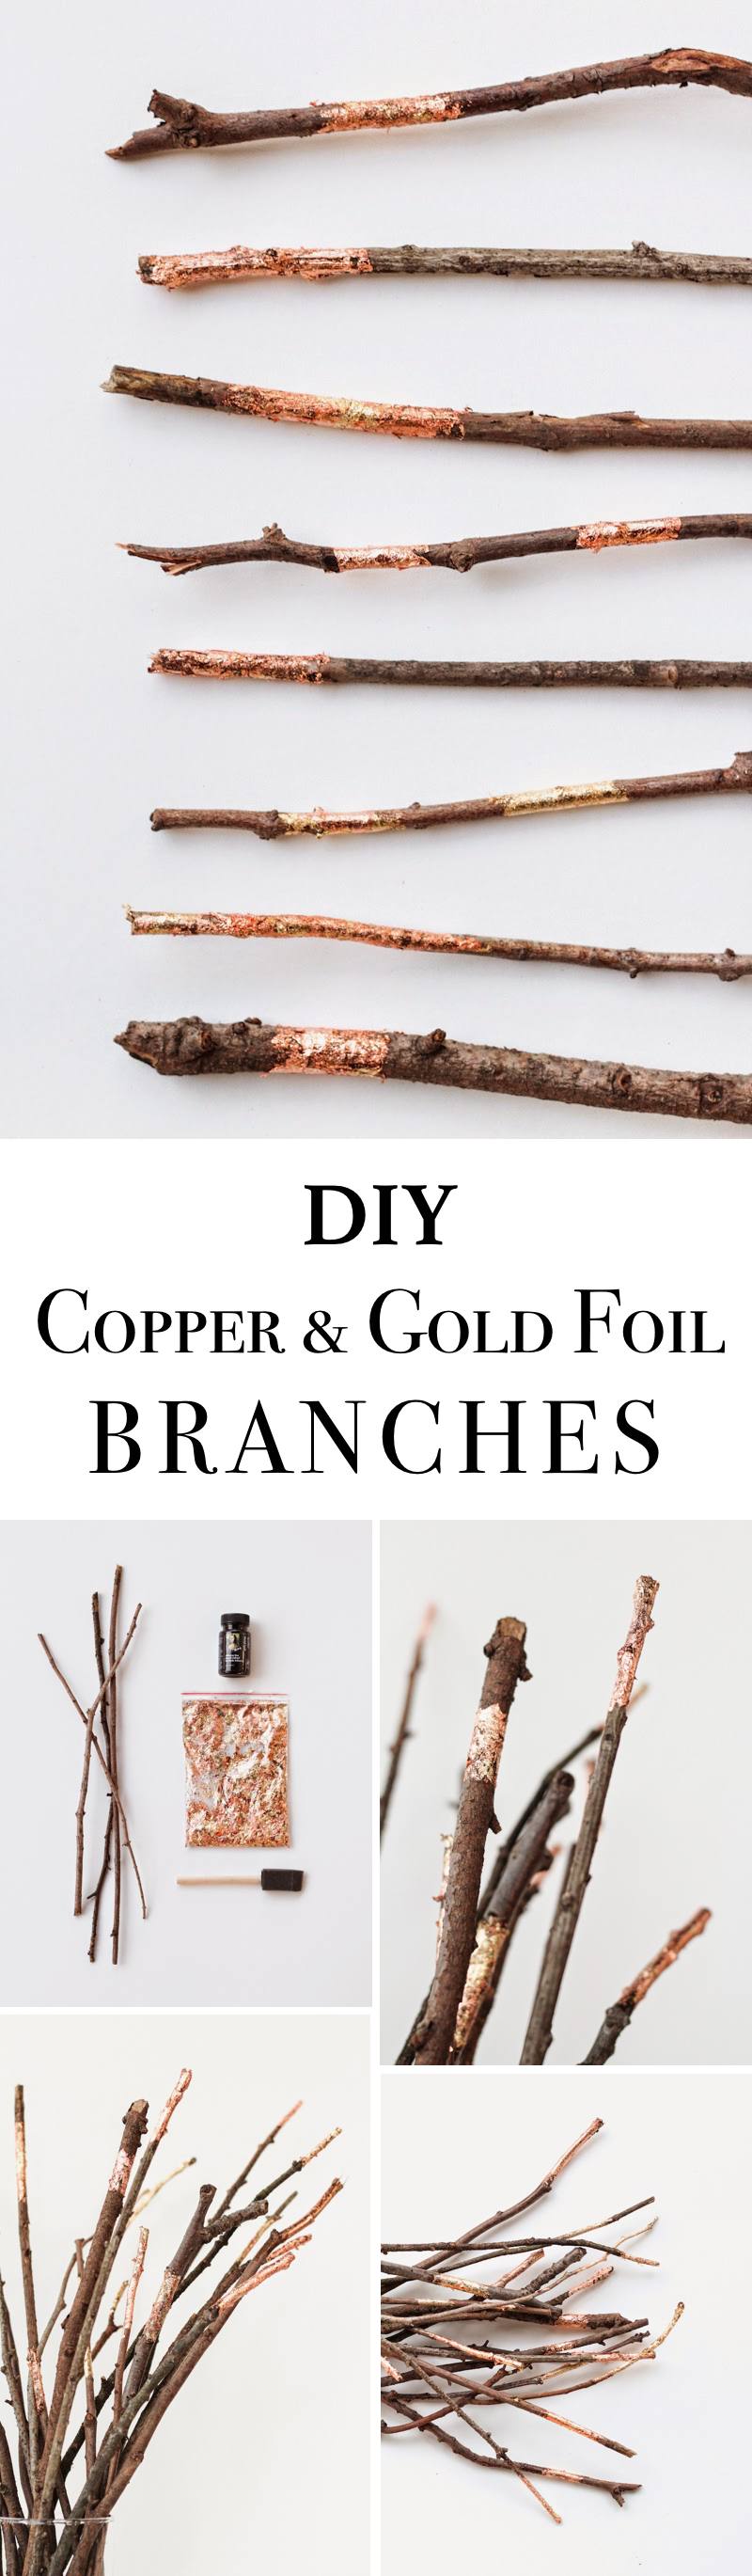 Copper and Gold Foil Branches